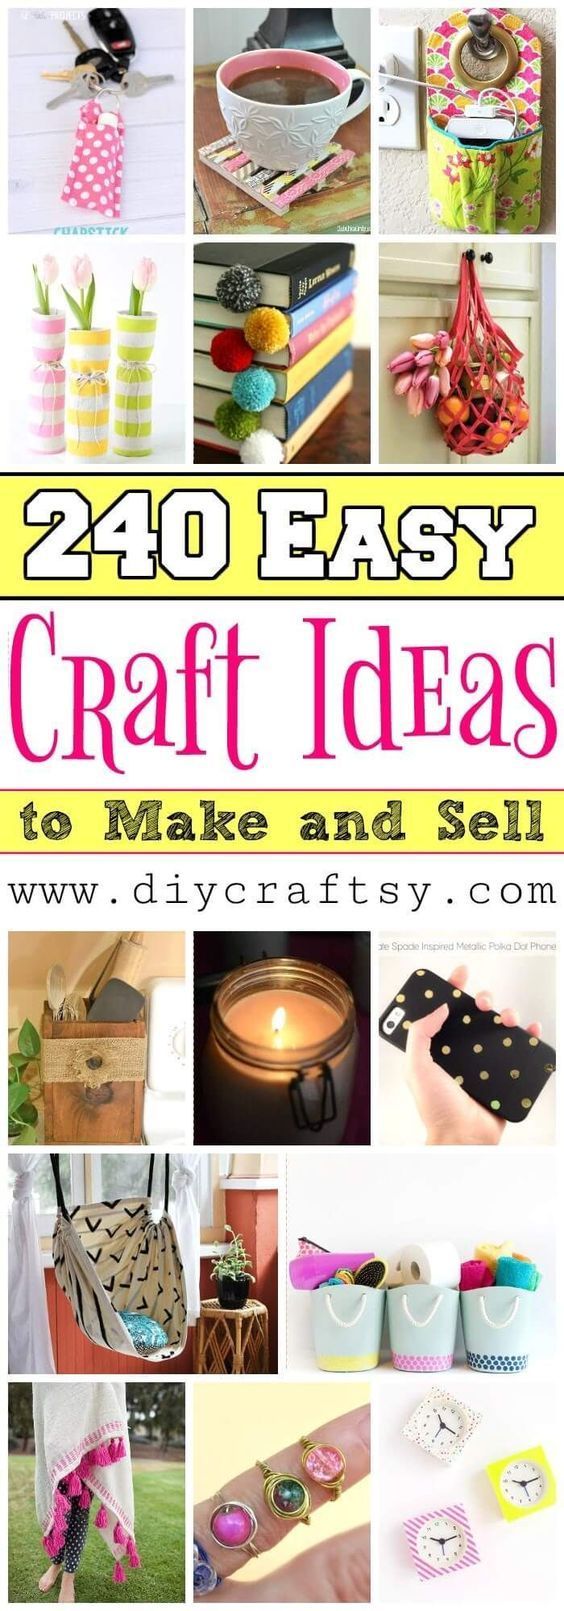 240 Easy Crafts to Make and Sell – DIY Craft Ideas -   18 diy projects Easy creative ideas